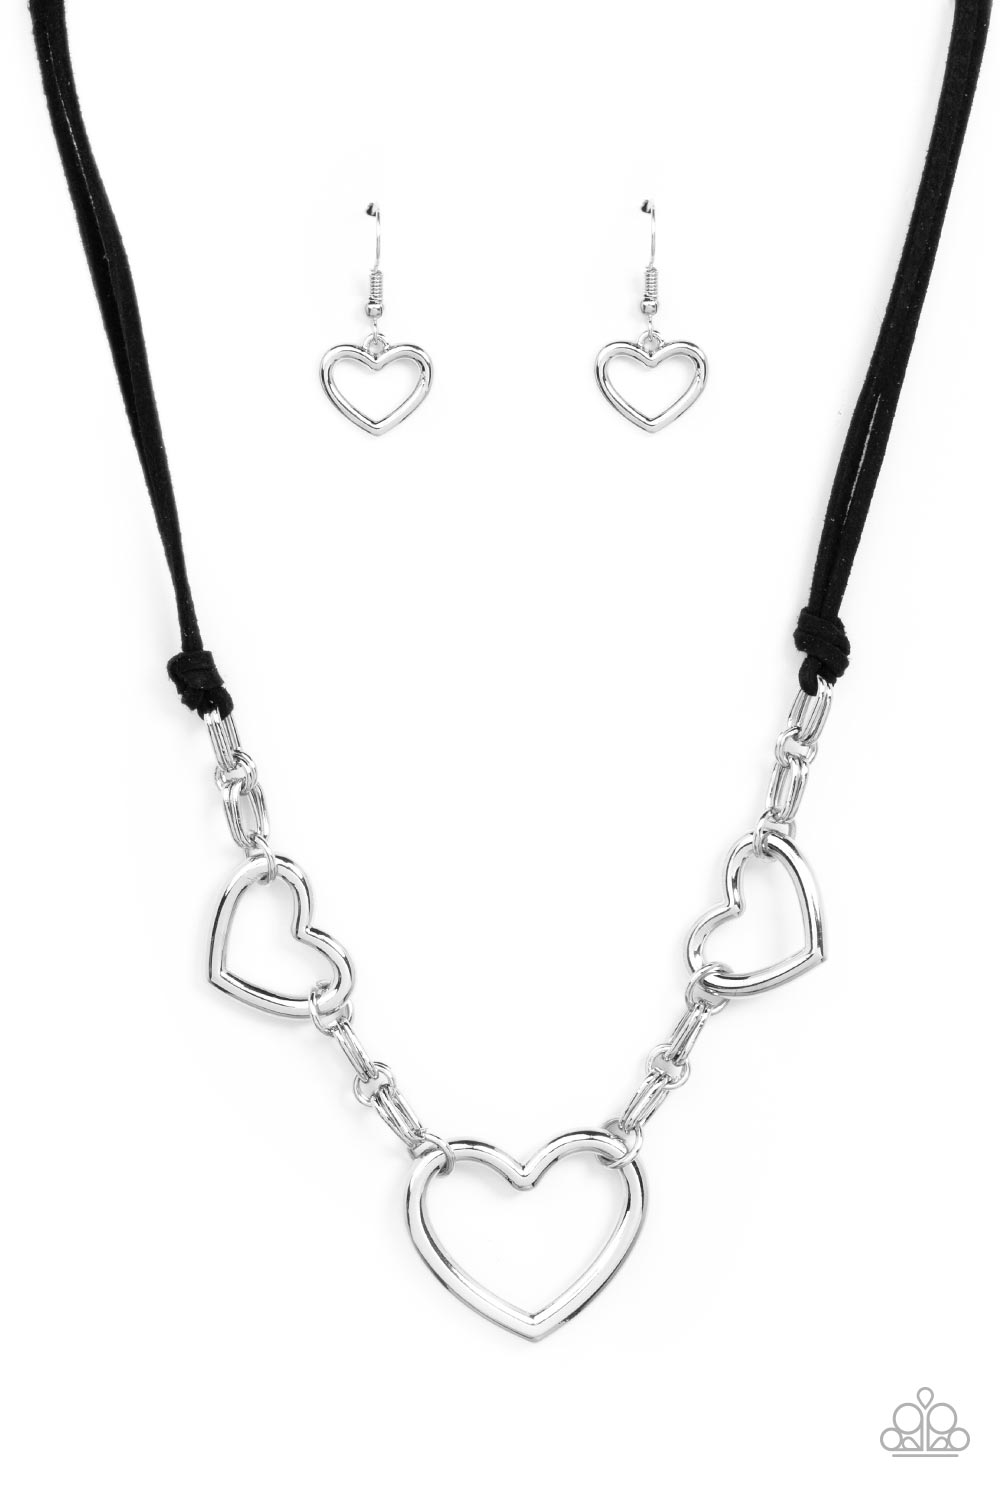 Fashionable Flirt - Black Suede - Silver Heart Necklace - Paparazzi Accessories - Strands of black suede knot around sections of chunky silver chains that have been adorned in oversized silver heart frames, resulting in a flirtatious display below the collar. Features an adjustable clasp closure. Sold as one individual necklace.